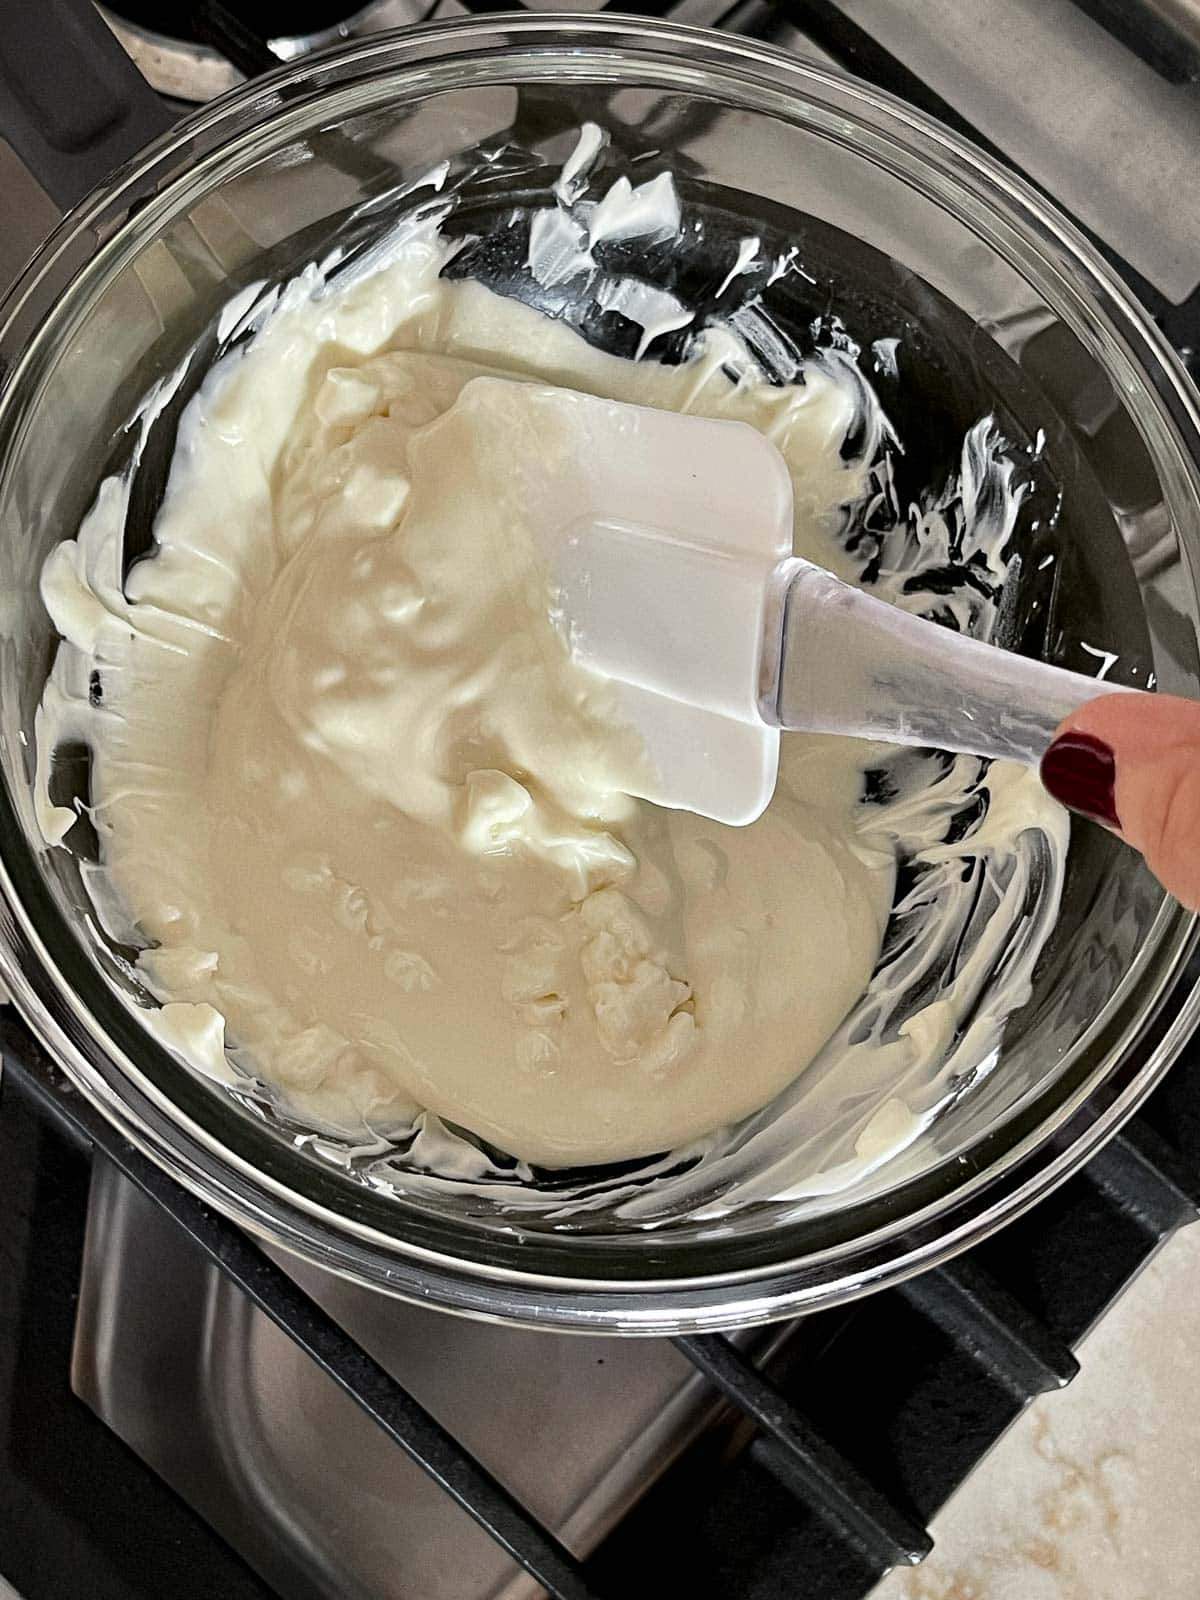 A white rubber spatula stirring melted white chocolate in a glass bowl on a stovetop.